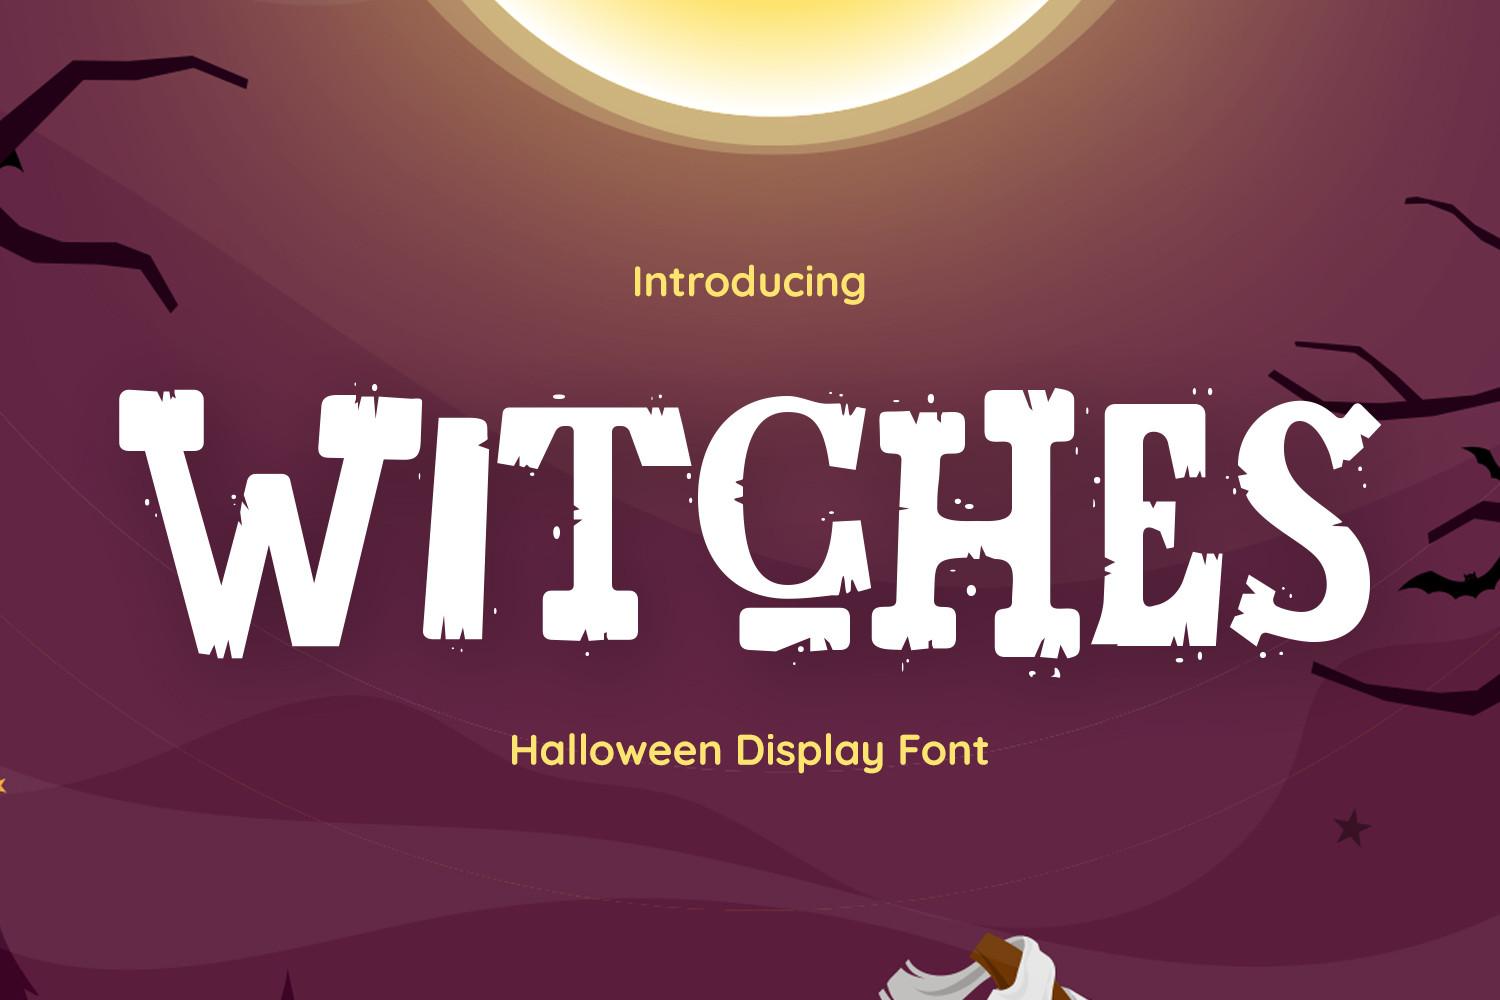 Witches Font